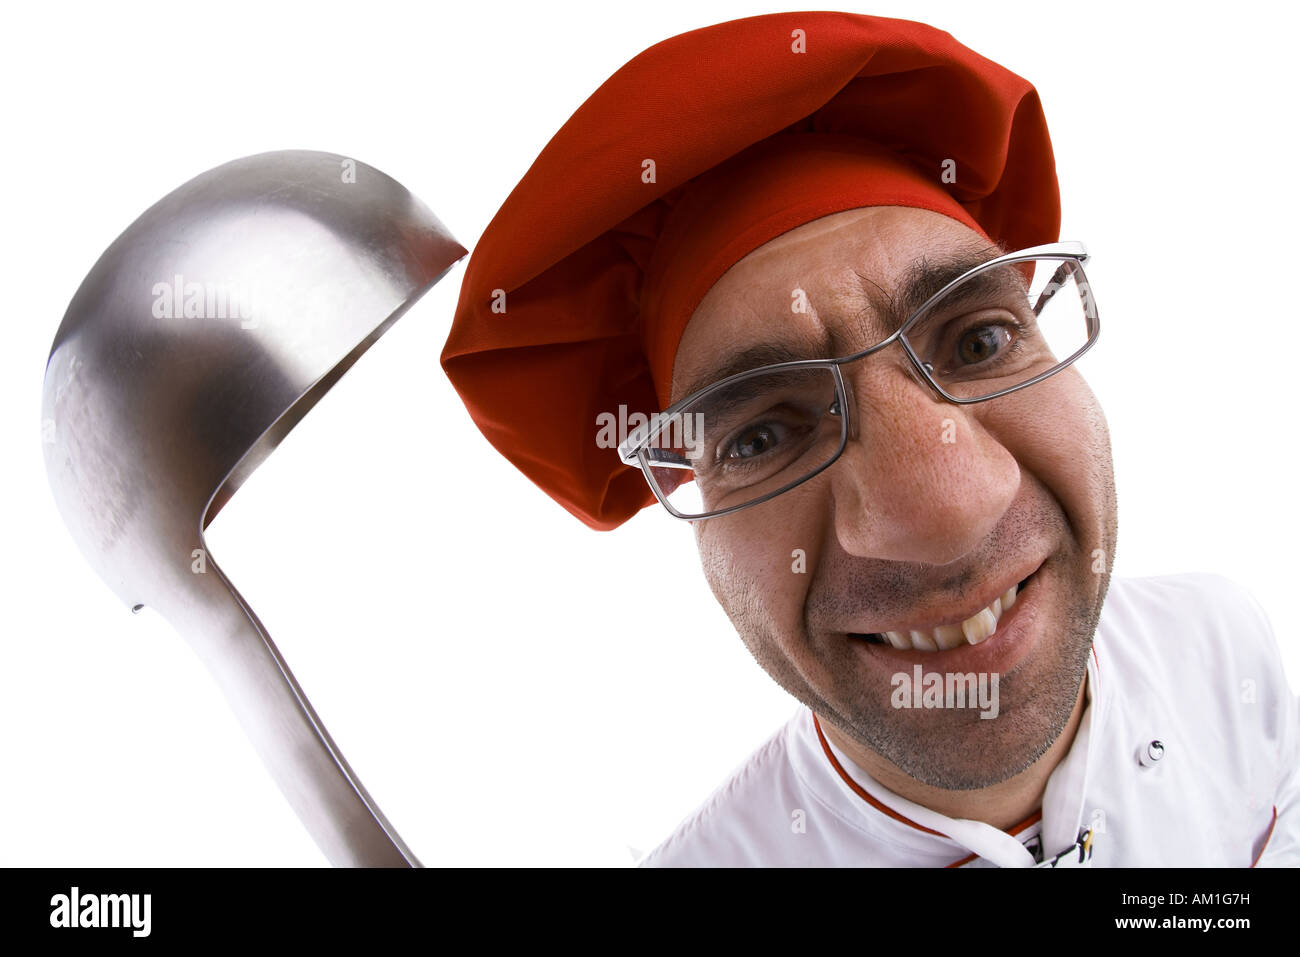 A cook with a dipper. photo made with a fisheye-lens. Stock Photo